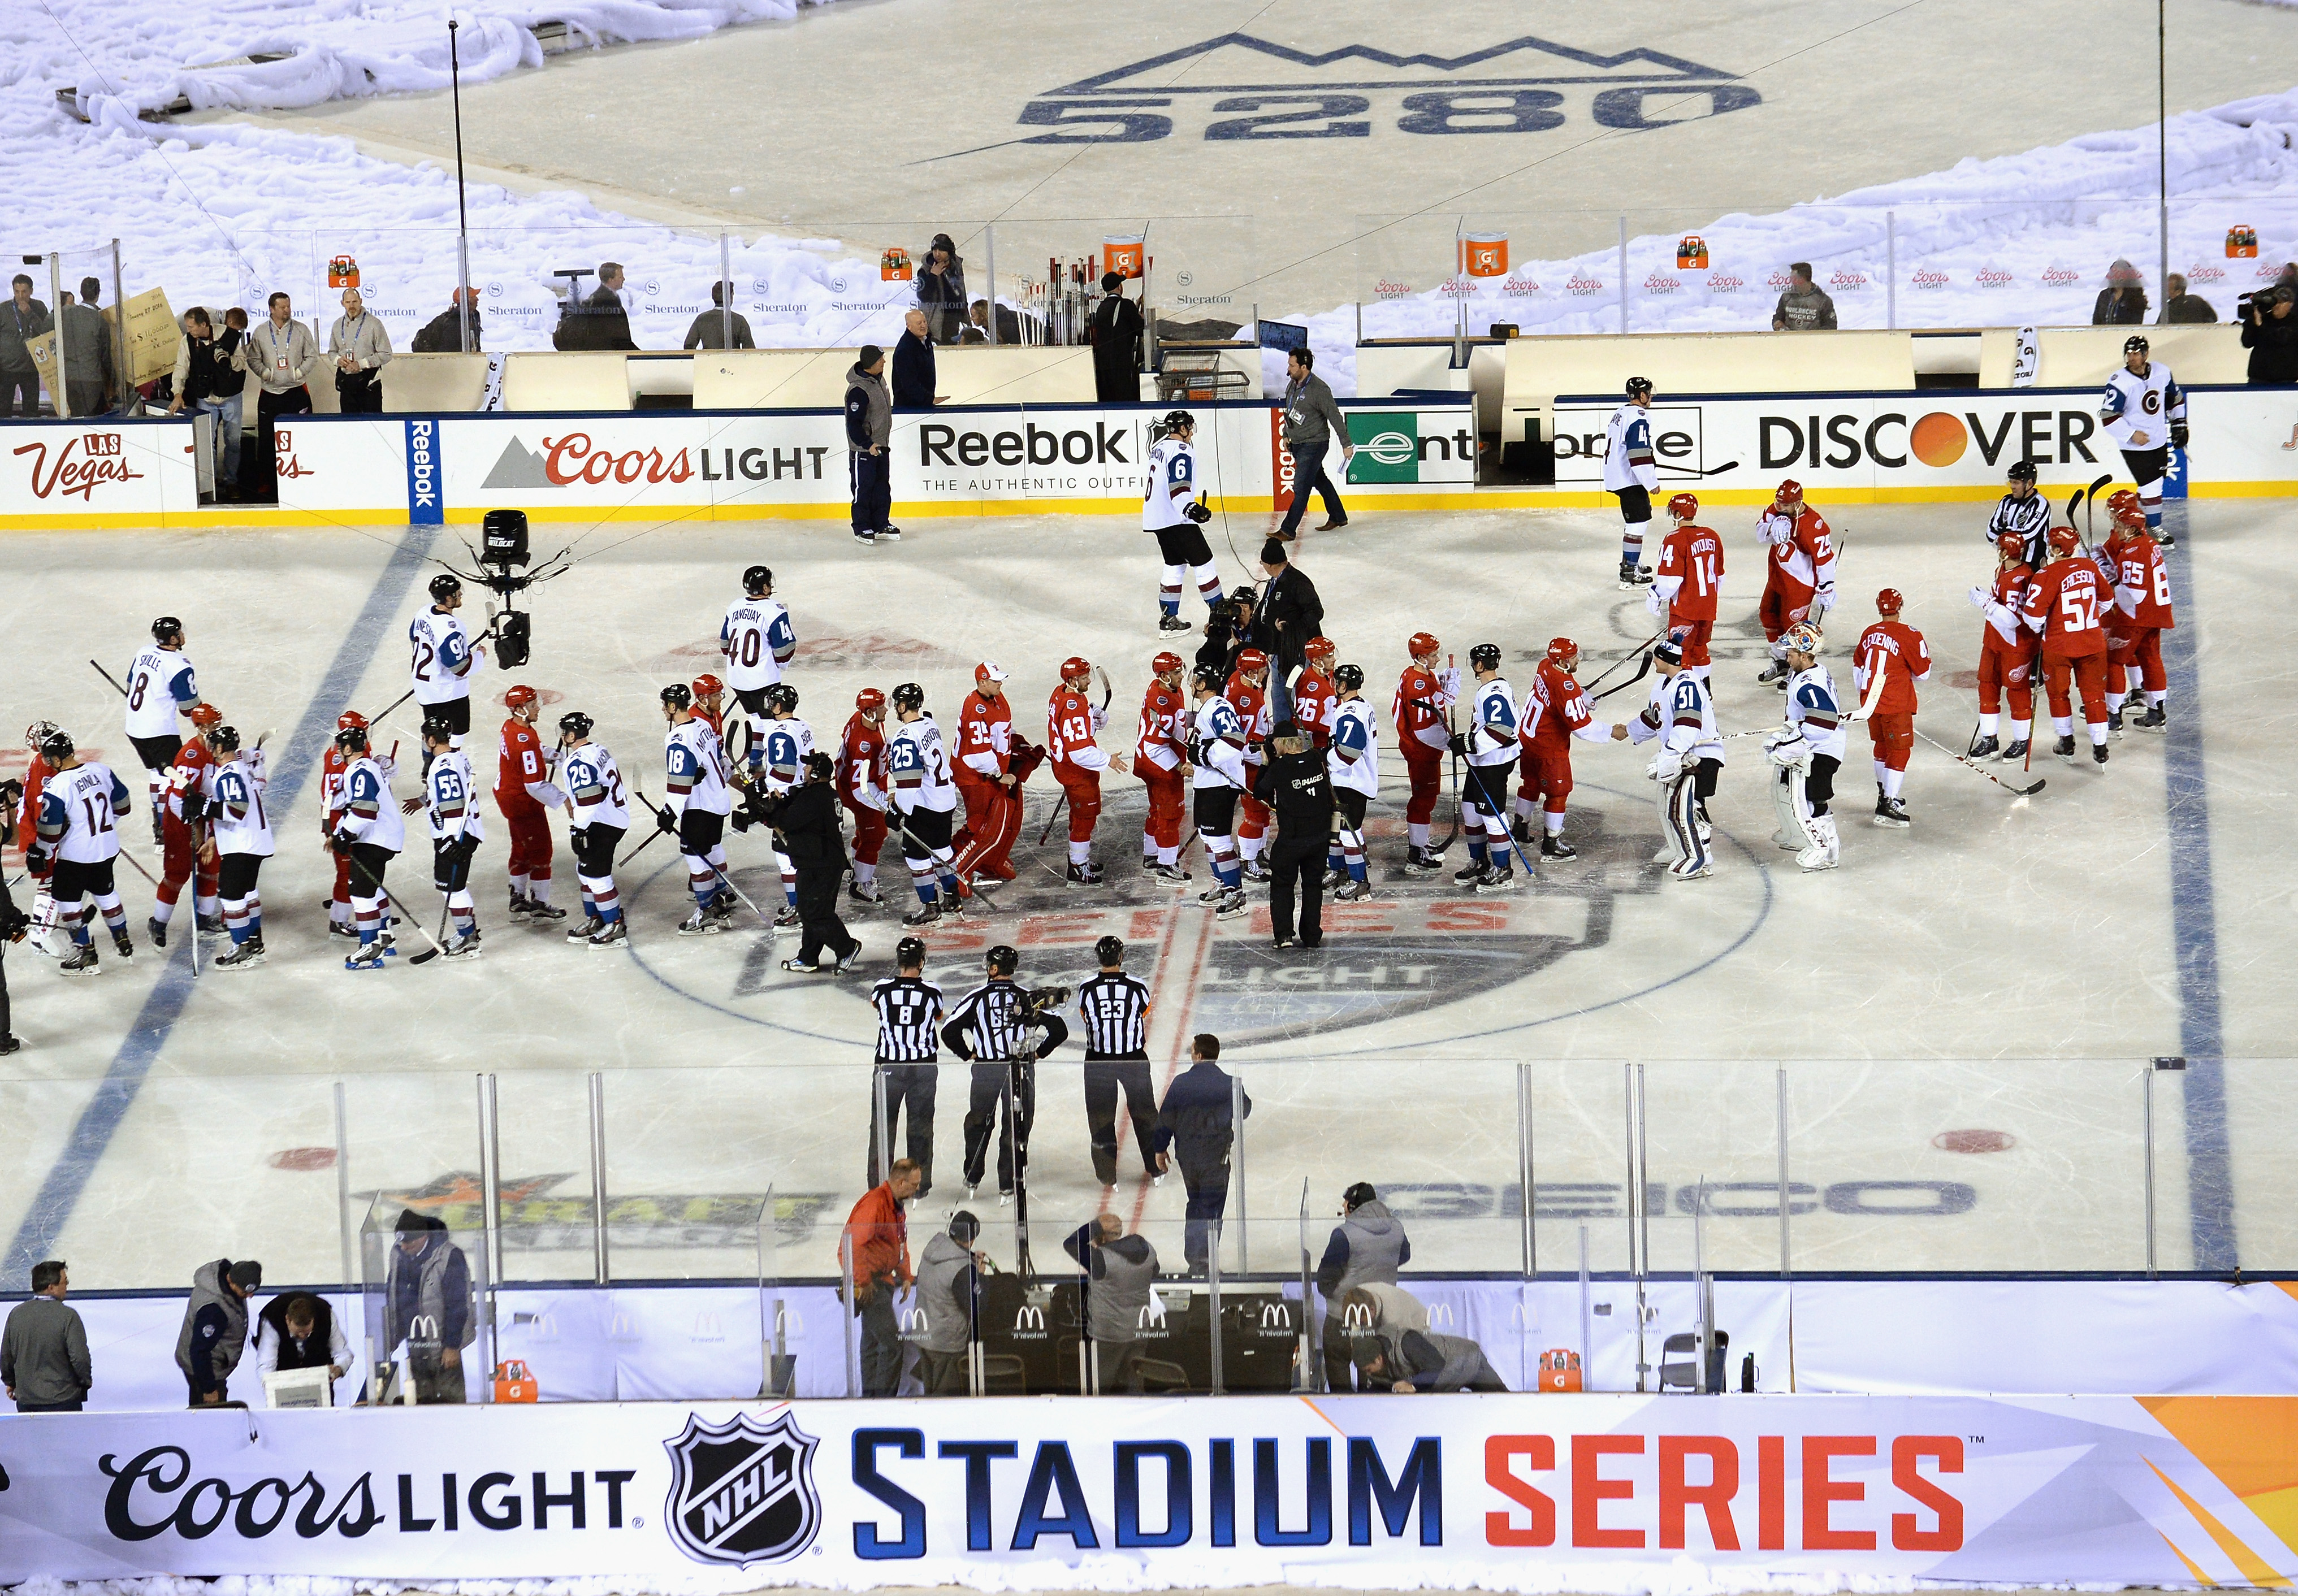 2017 COORS LIGHT NHL STADIUM SERIES™ TO INCLUDE PITTSBURGH